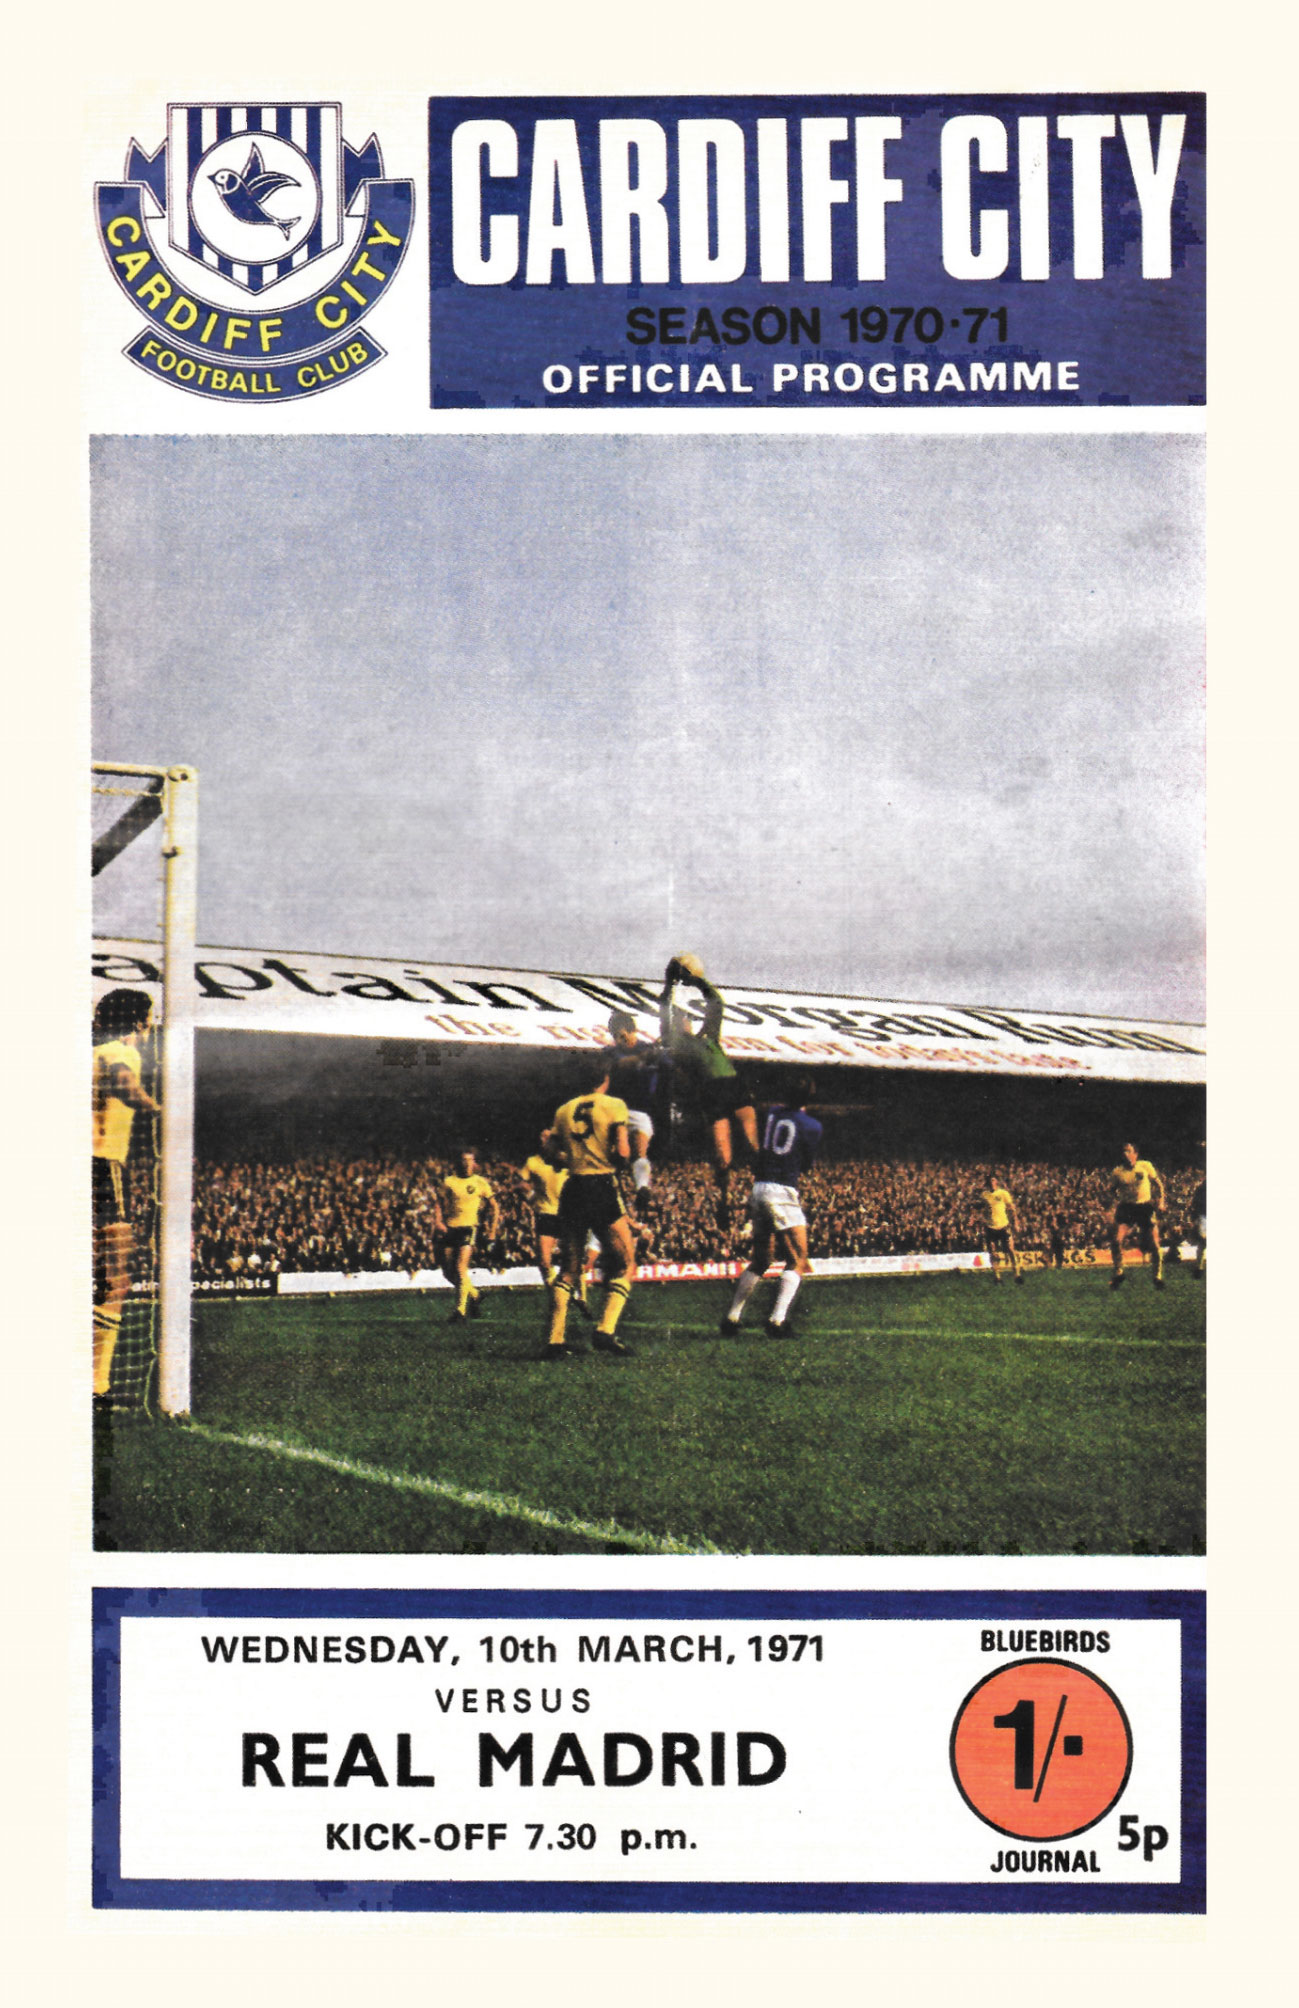 Programme cover from when the Bluebirds faced Real Madrid...